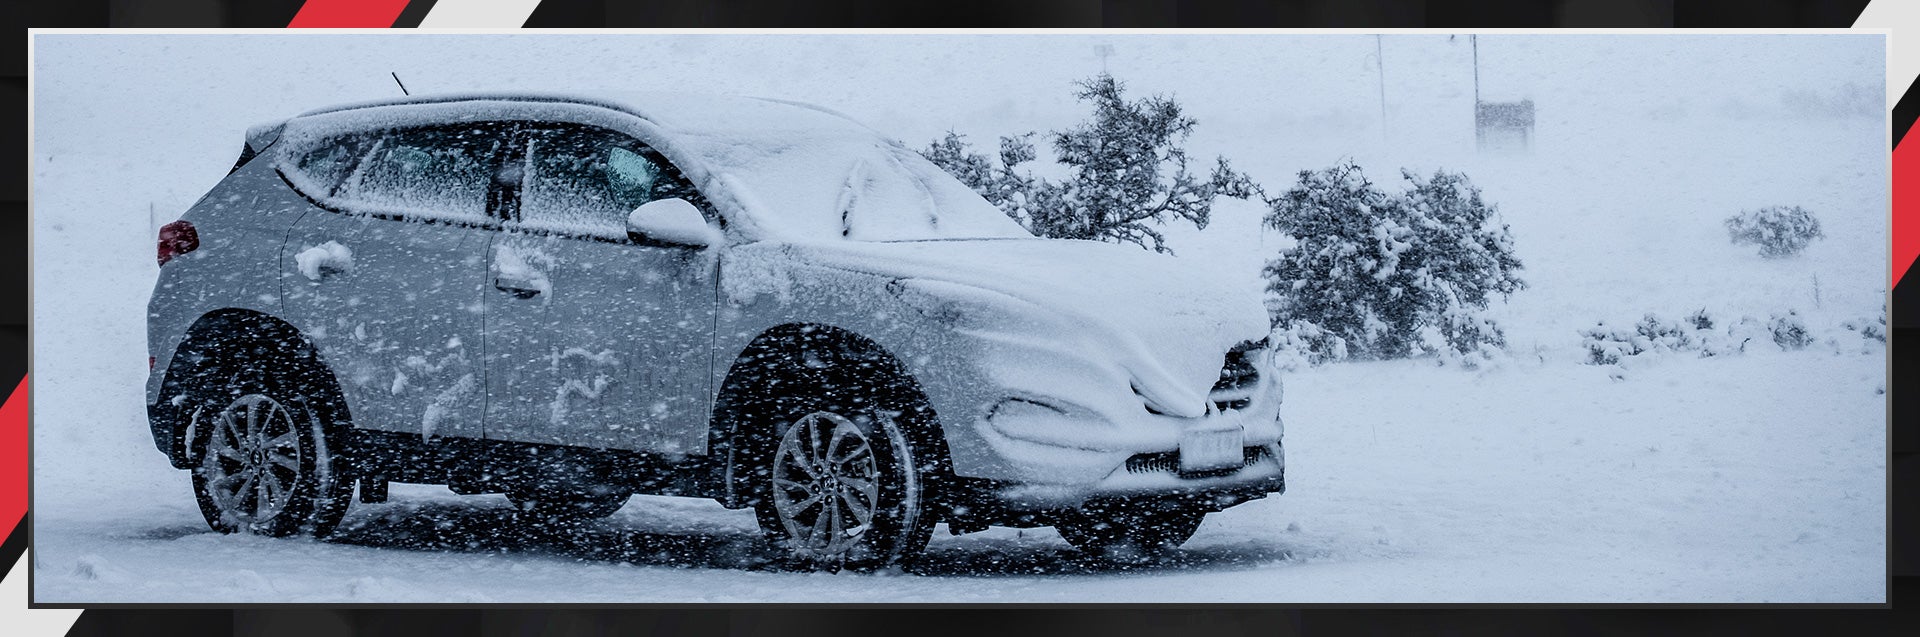 Can Snow Damage Your Car